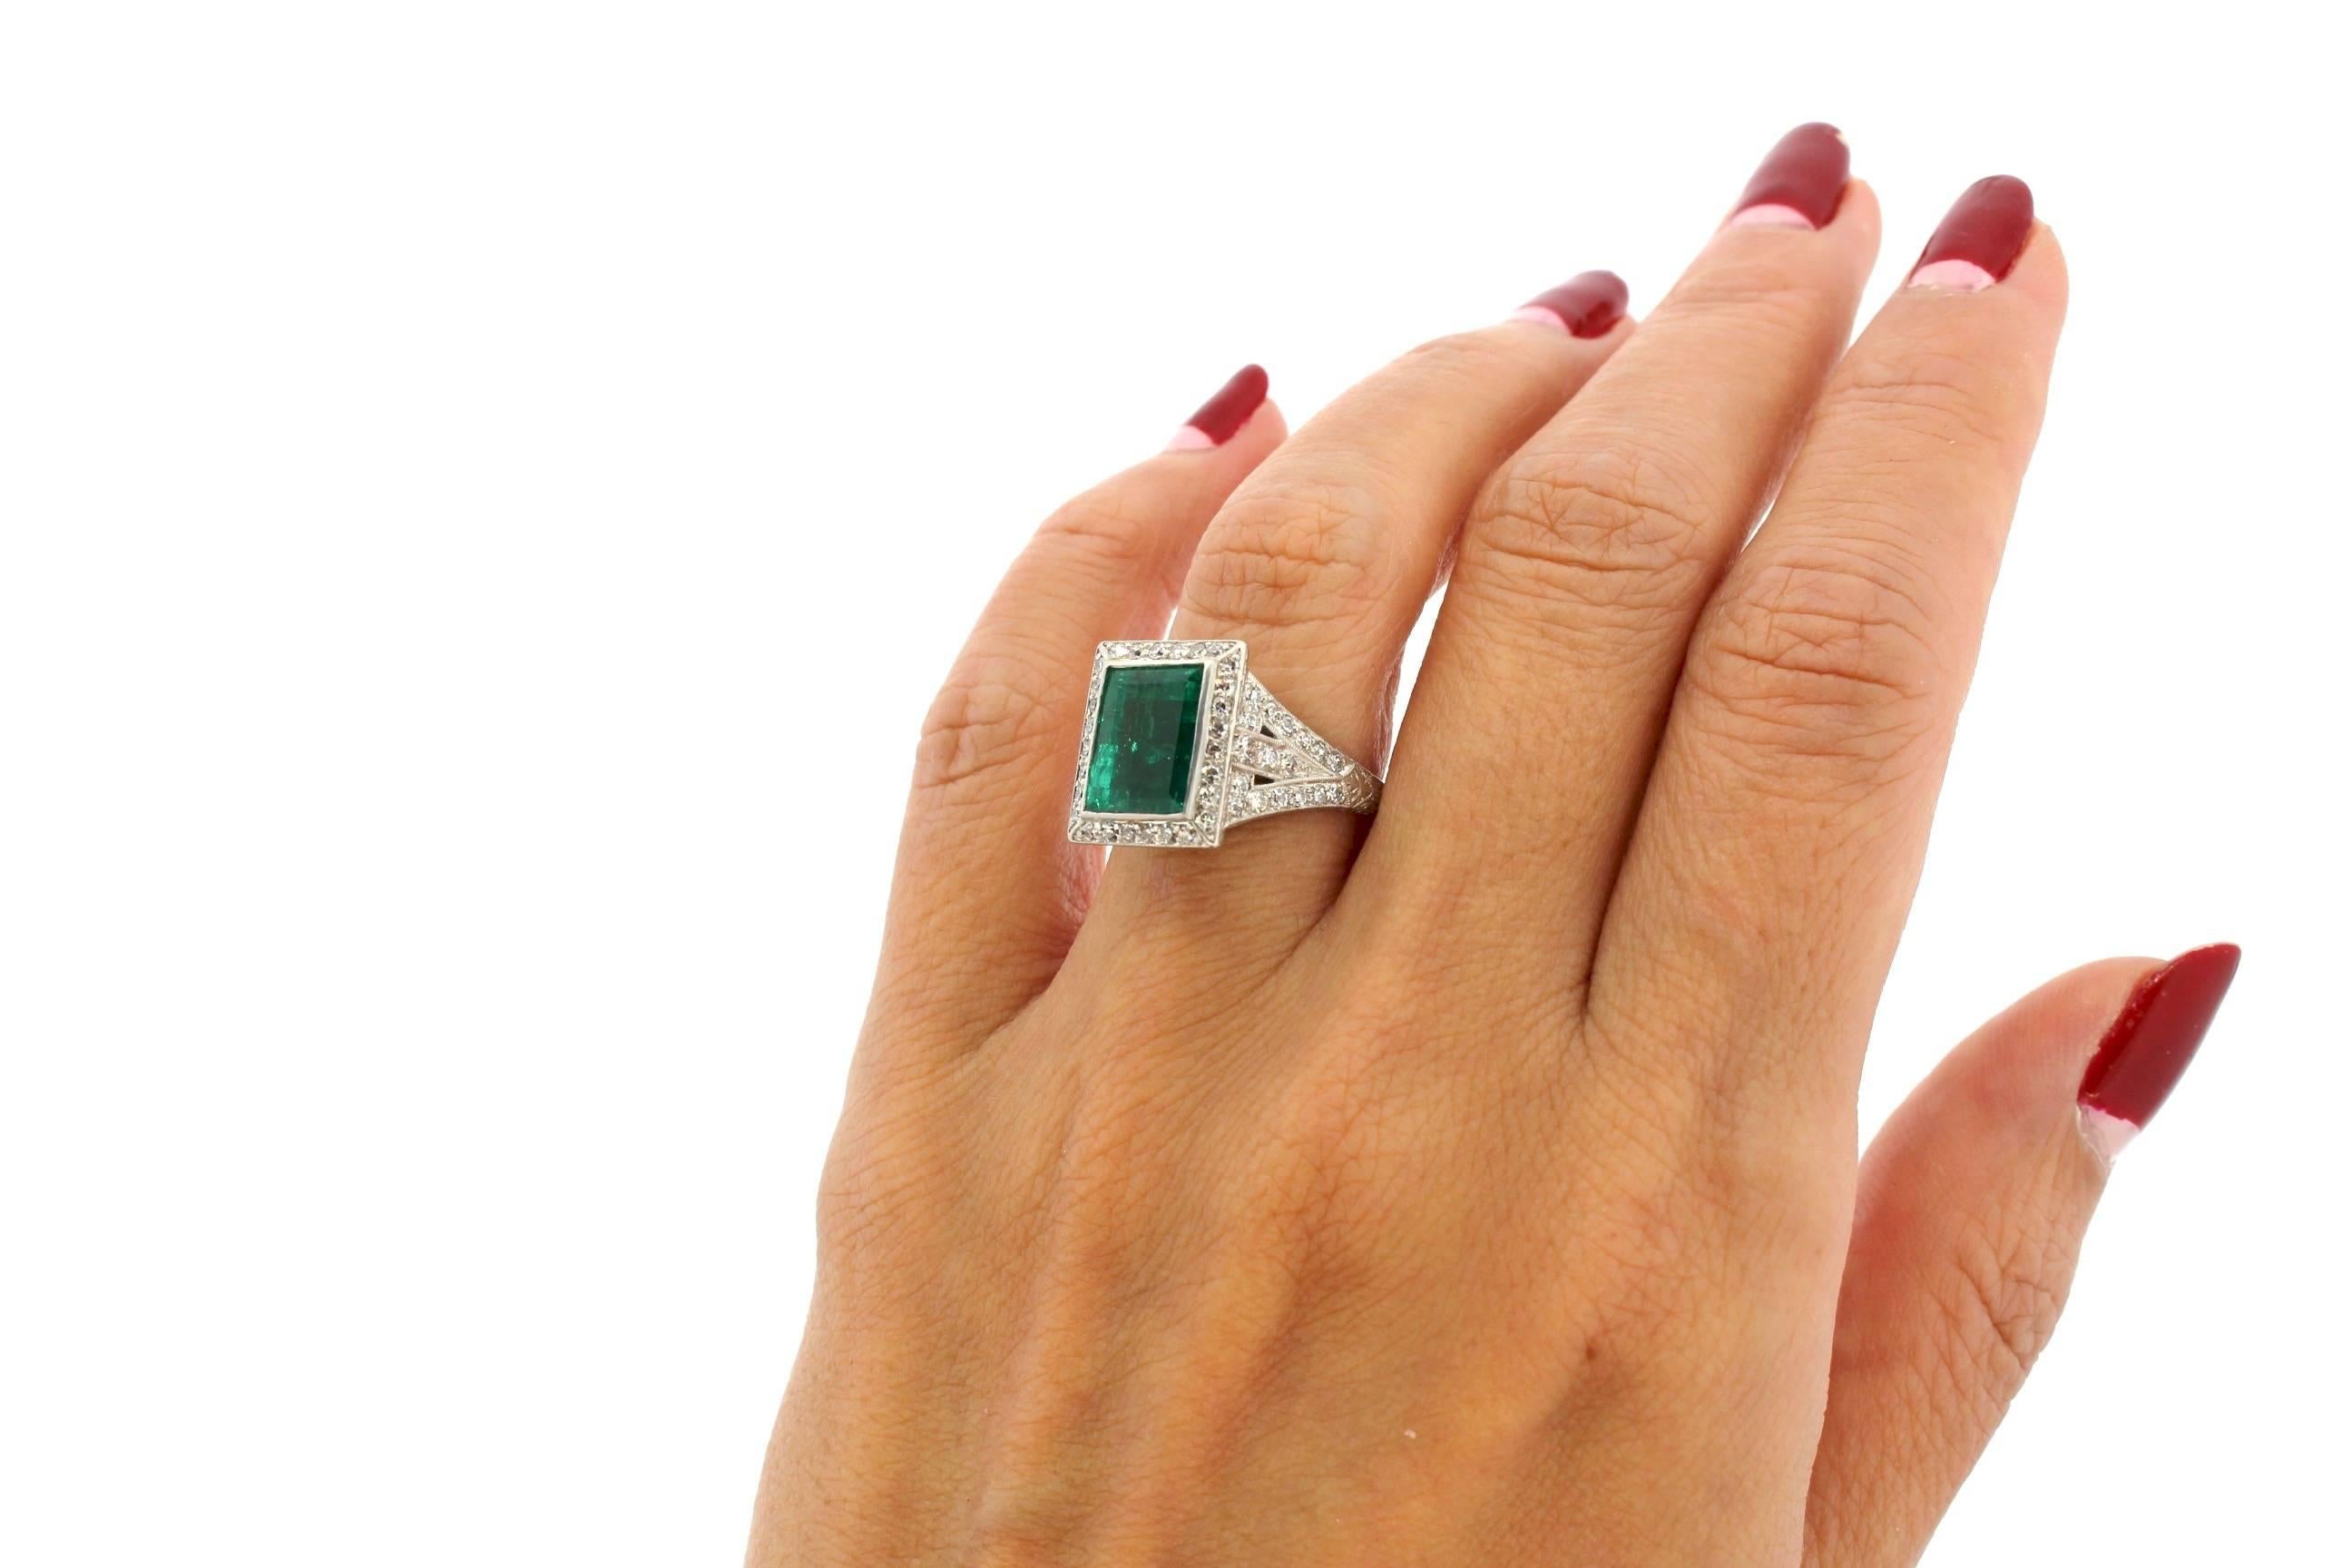 This is a beautiful emerald cut fine Emerald ring set in a handmade Art Deco platinum setting.  The emerald is measured to be about 4 carats, and is accompanied by a certificate from the American Gemological Laboratories stating that it is from